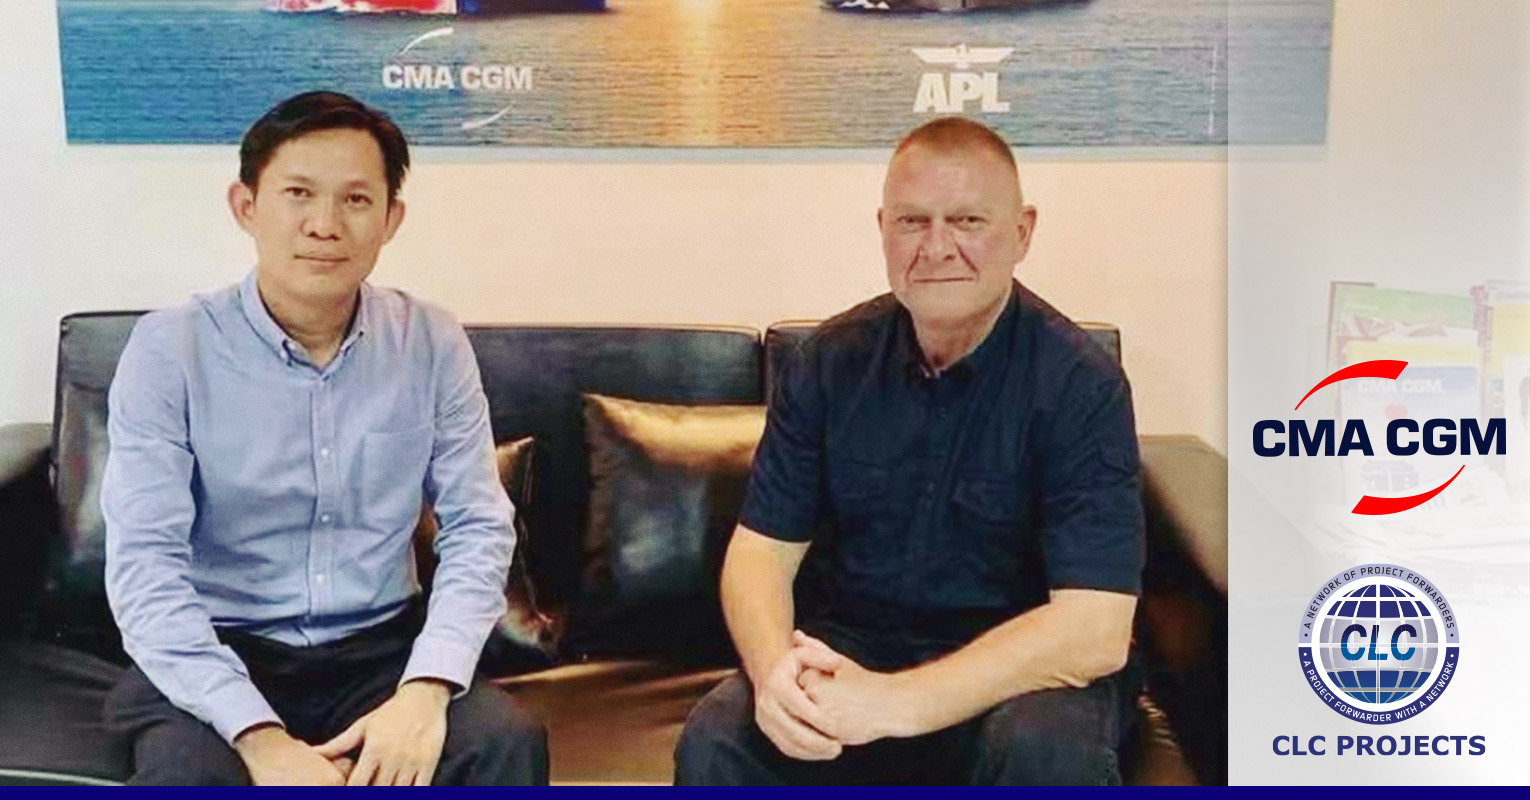 CLC Projects met with CMA CGM Cambodia.